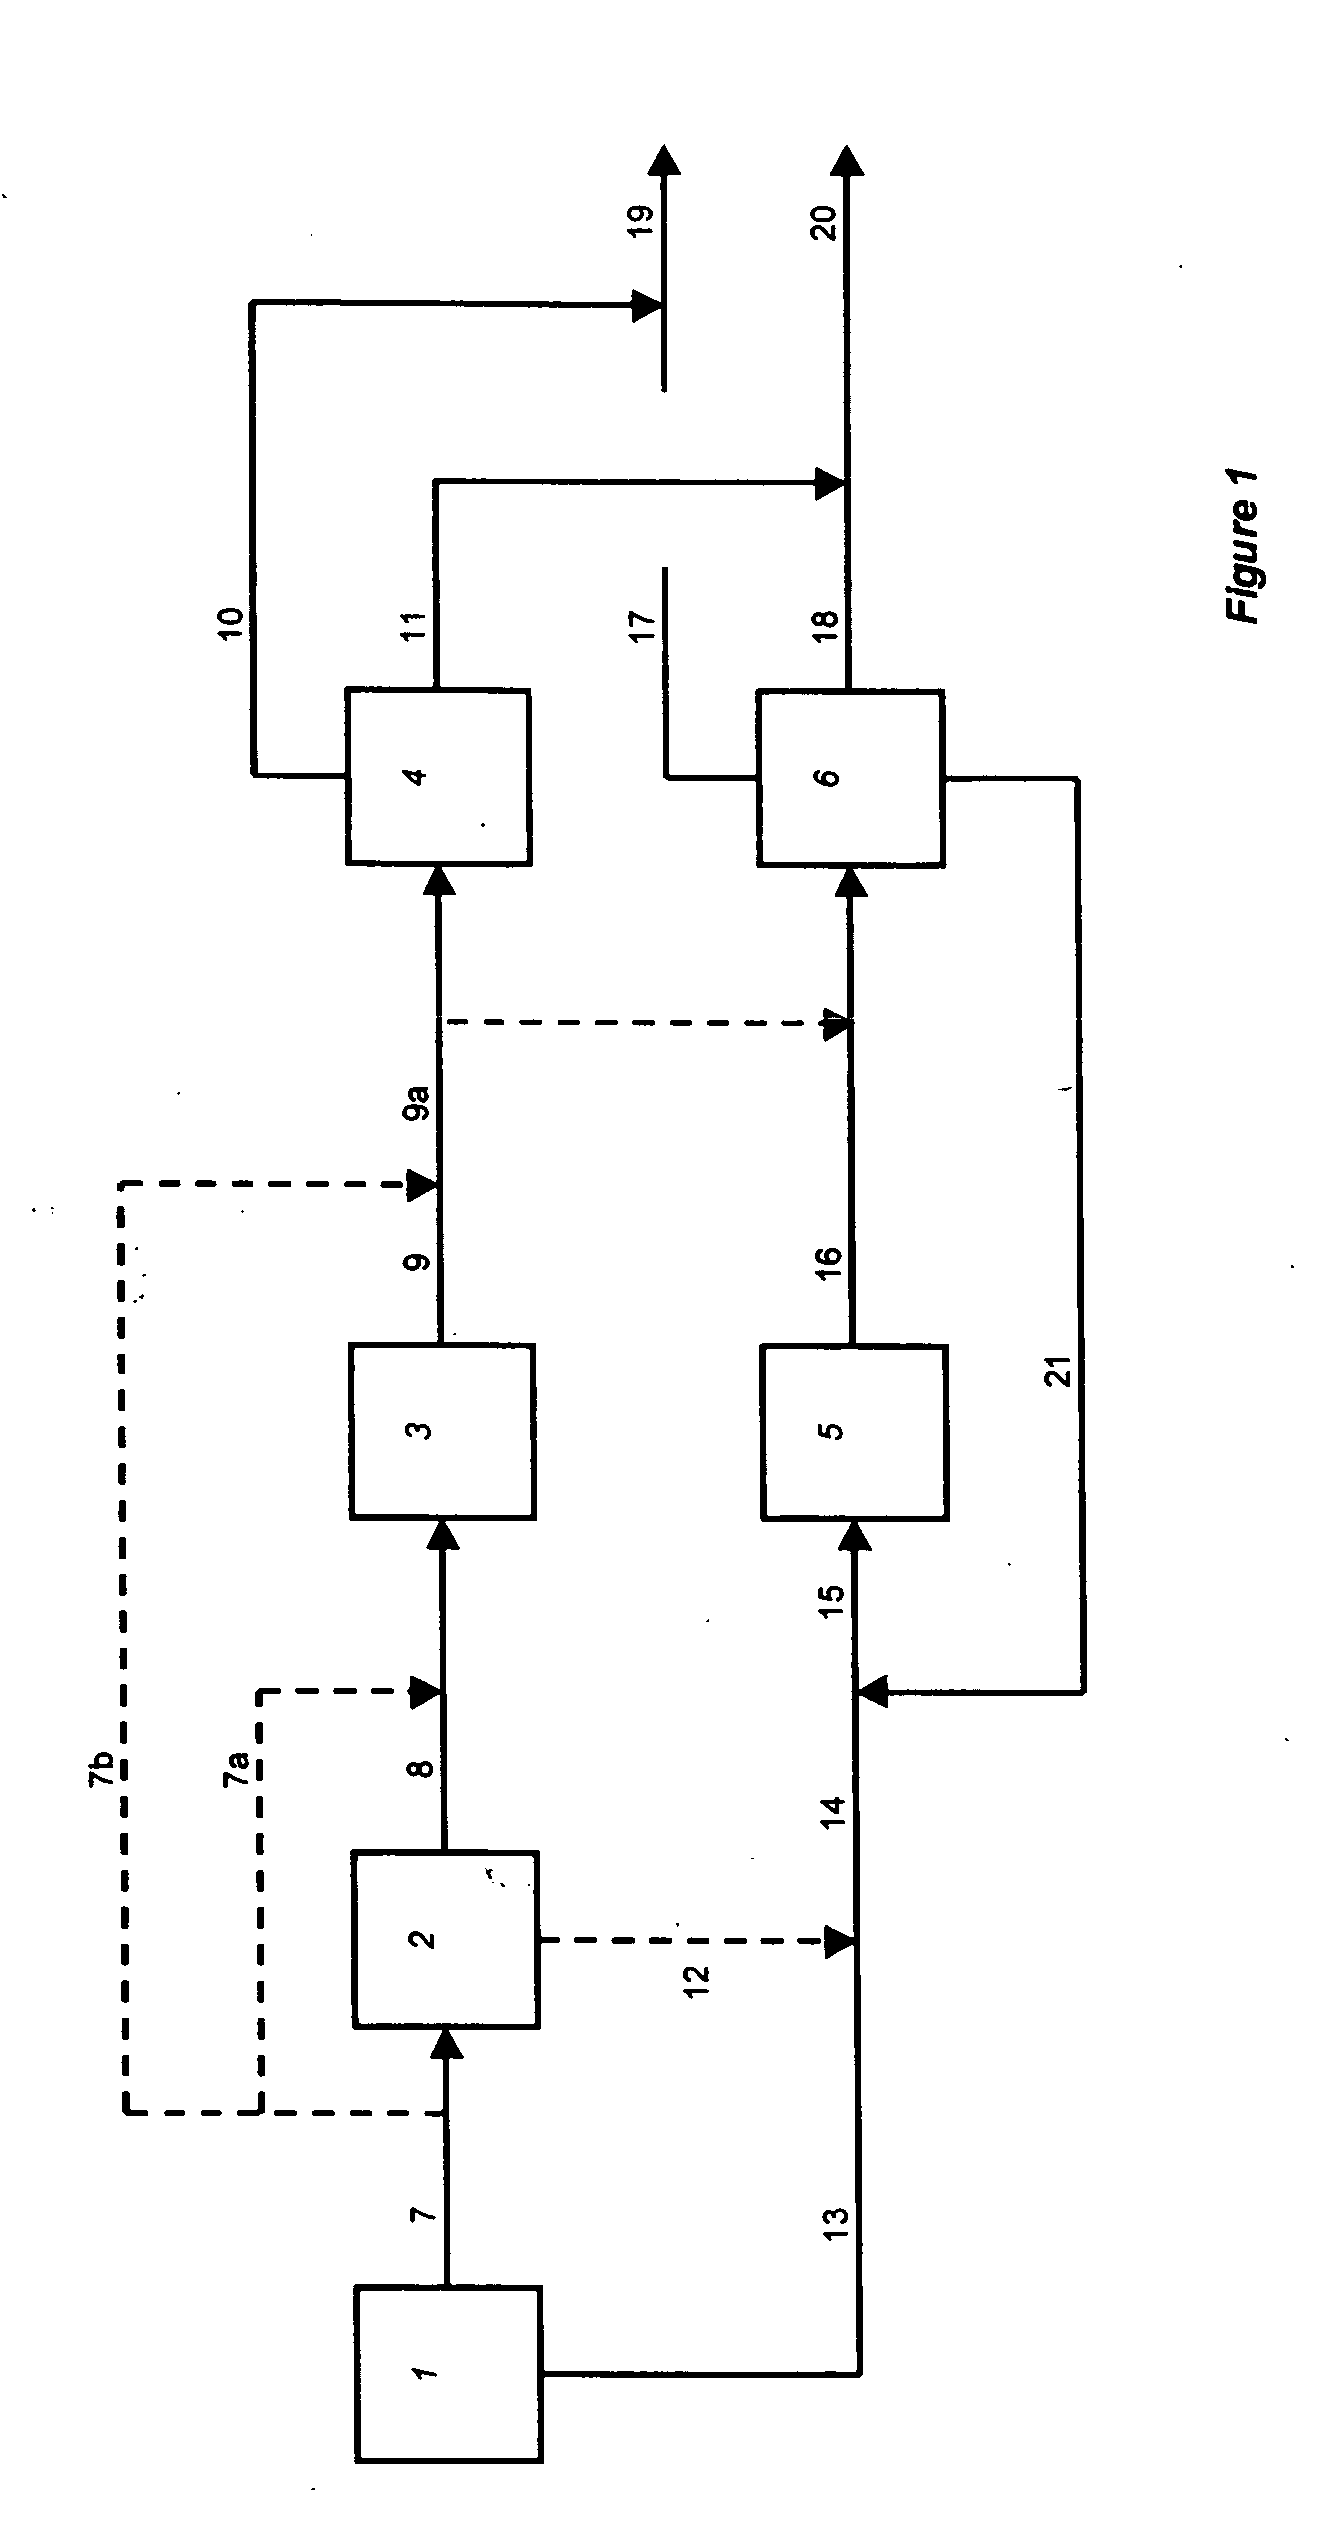 Synthetic fuel with reduced particulate matter emissions and a method of operating a compression ignition engine using said fuel in conjunction with oxidation catalysts